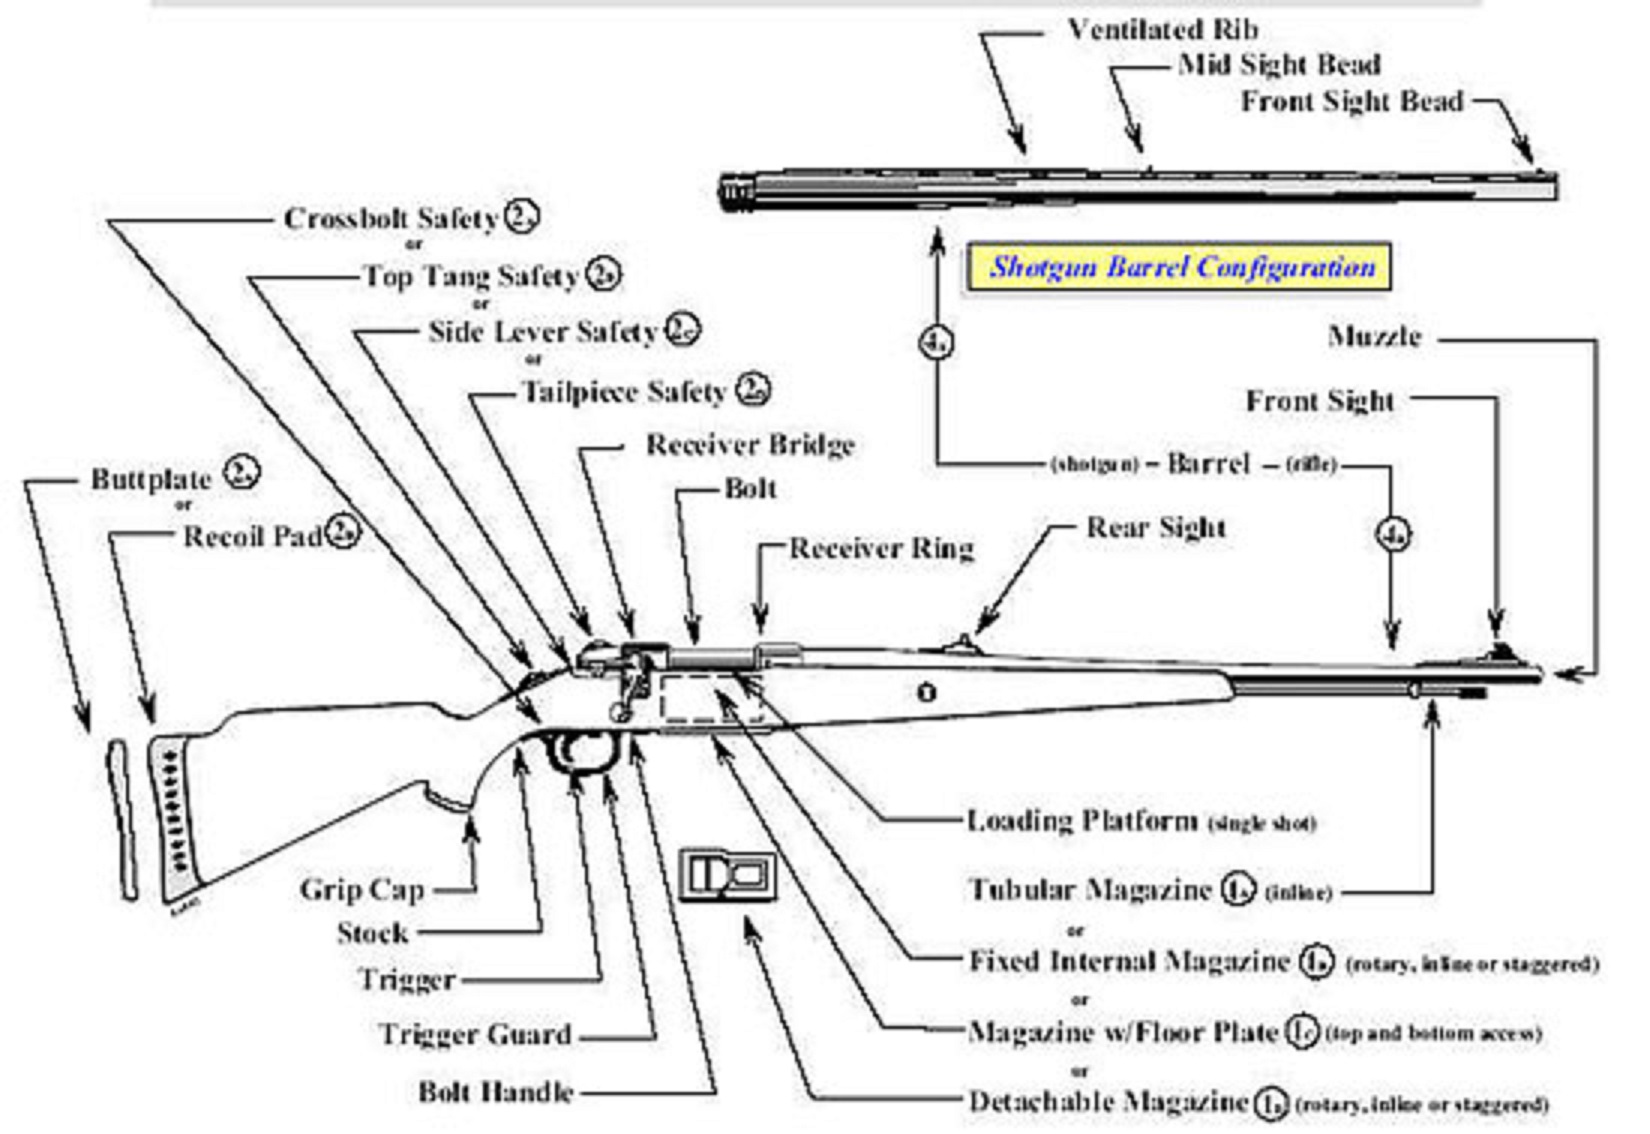 Image (large) of an illustration exhibiting the primary characteristics of a rifle. 